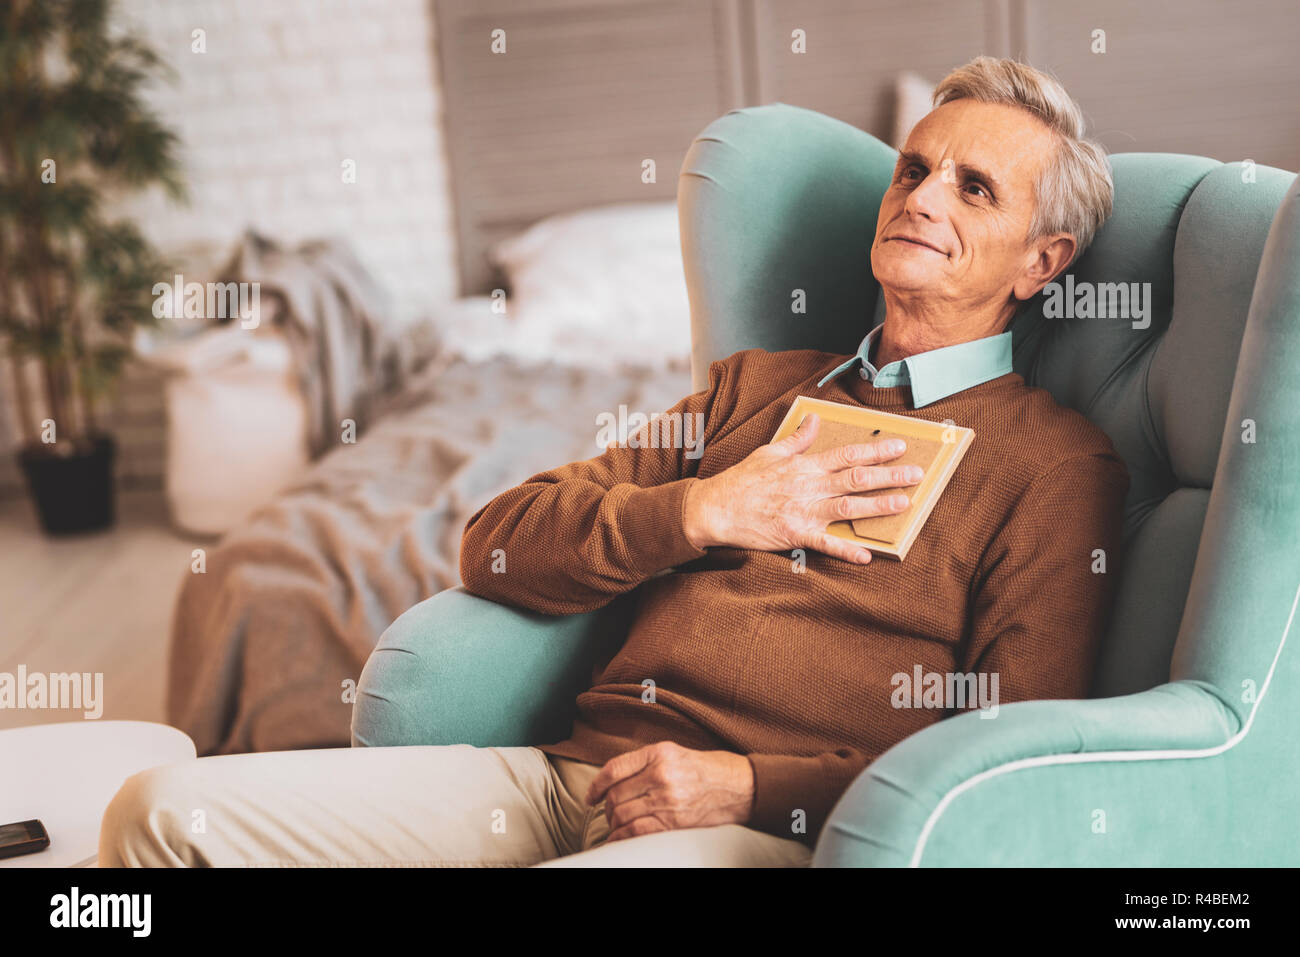 Family holidays. Happy retired man feeling very unforgettable after unbelievable summer family holidays Stock Photo